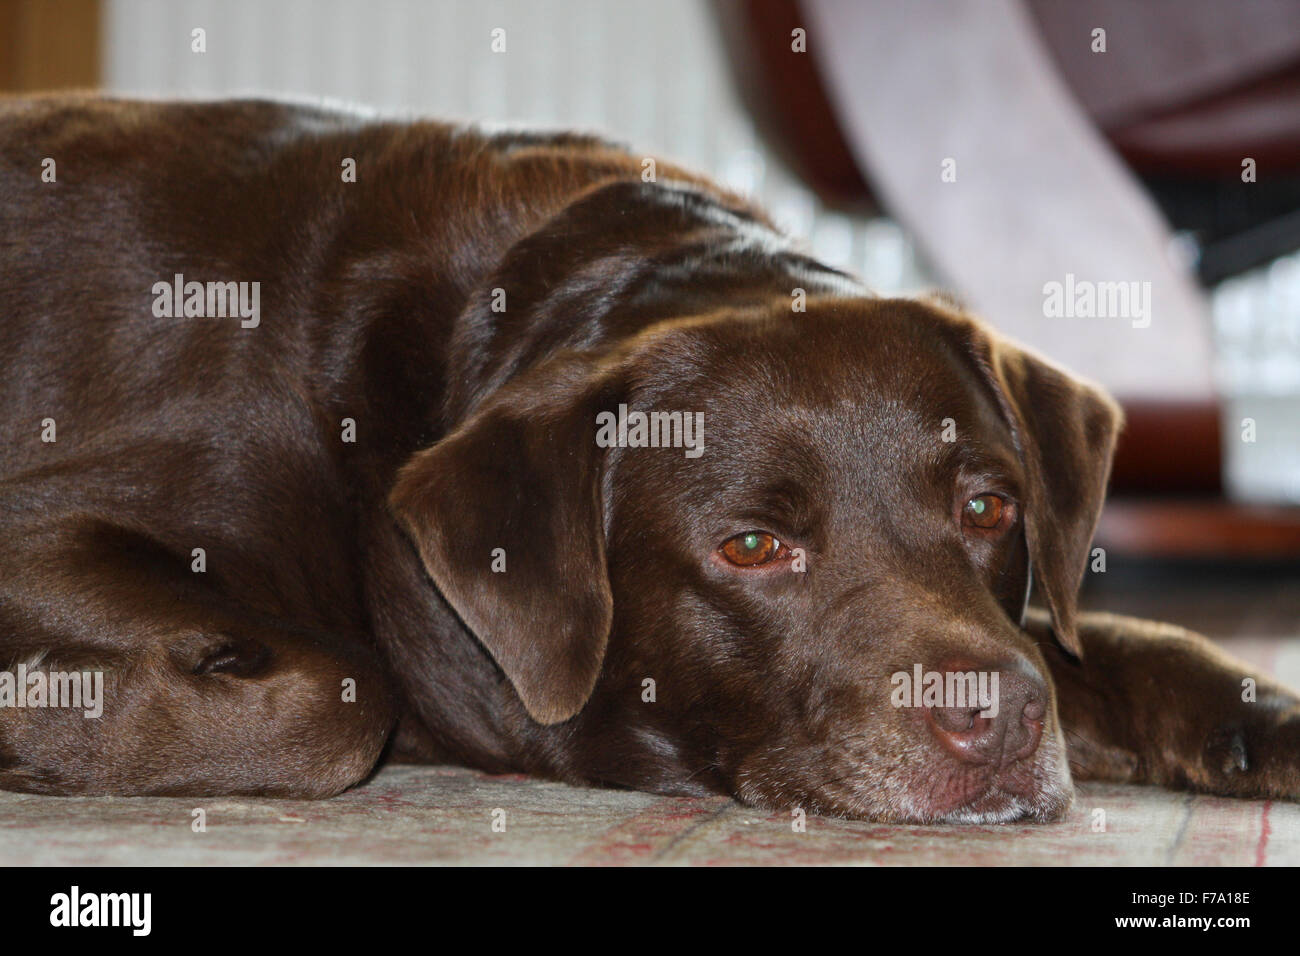 Brown/red/chocolate labrador retriever dog laid down in room looking down Stock Photo